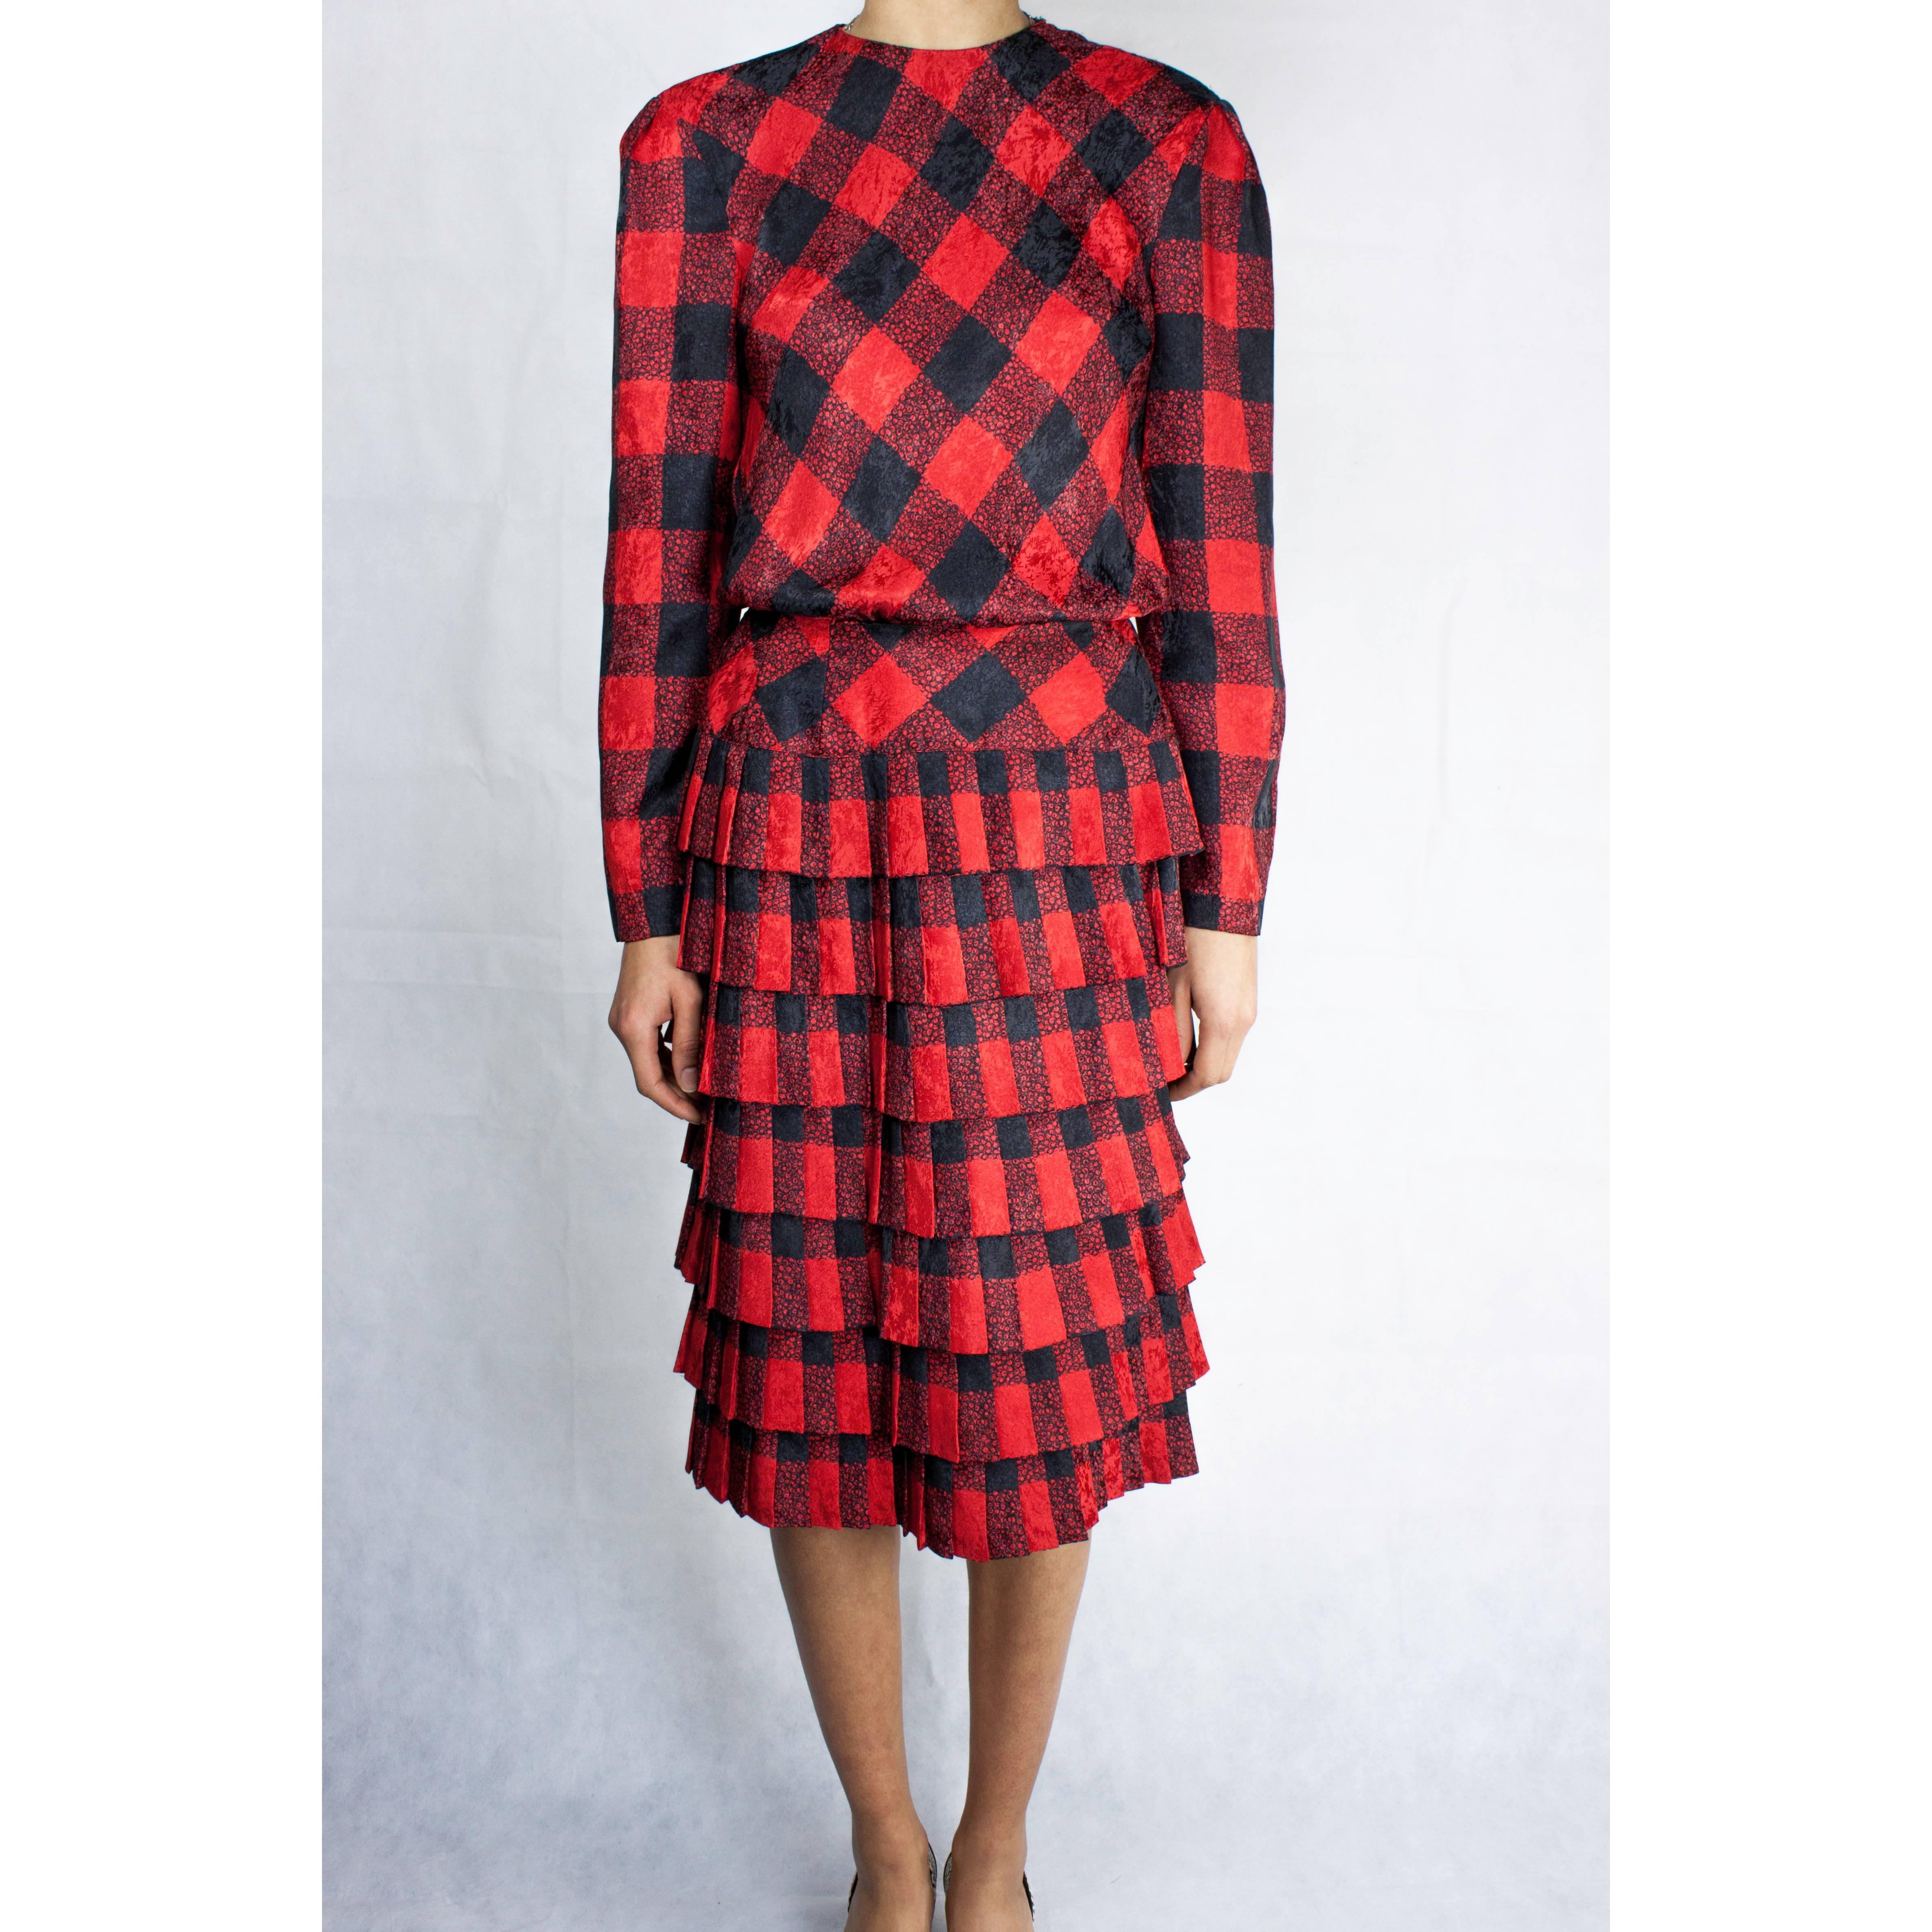 
This Louis Feraud dress is constructed from a silk-like moiré polyester material. Worn with a patten leather belt.Featuring a round neckline, long sleeves and fitted bodice. The fully lined skirt is adorned with layers of pleated ruffles. Fastening